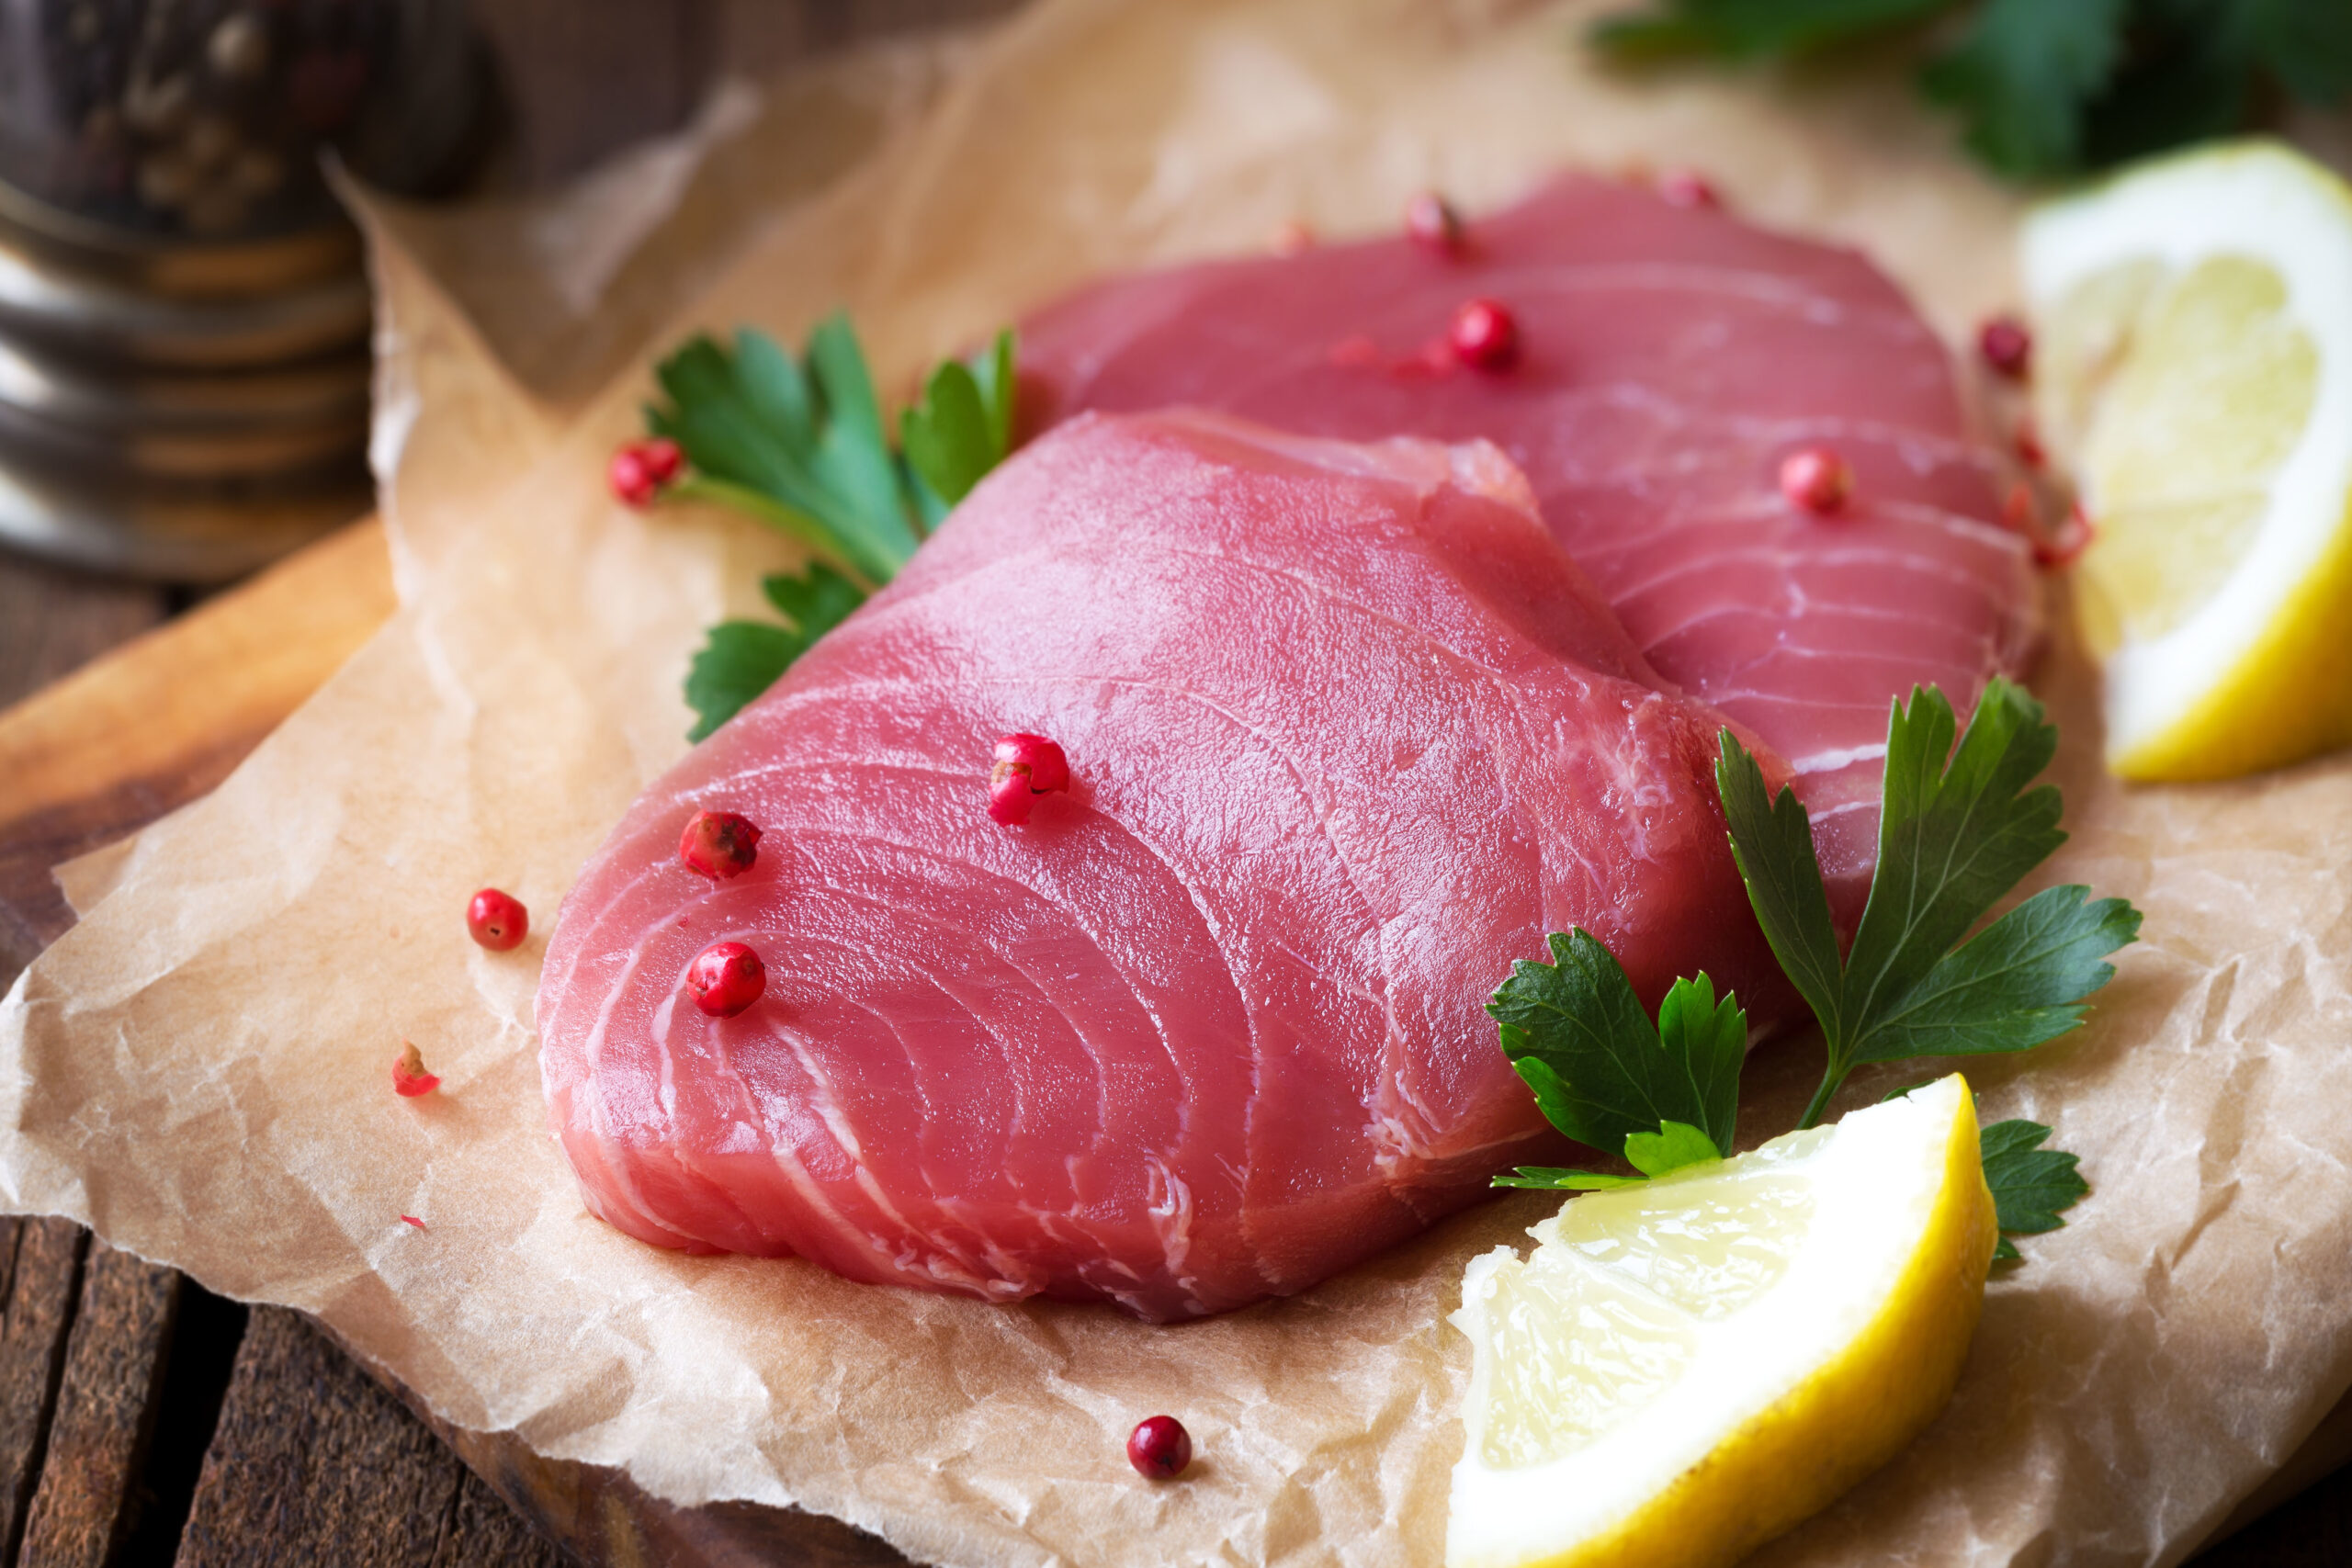 The Tuna Diet: Is it Safe And Does It Assist Weight Loss?